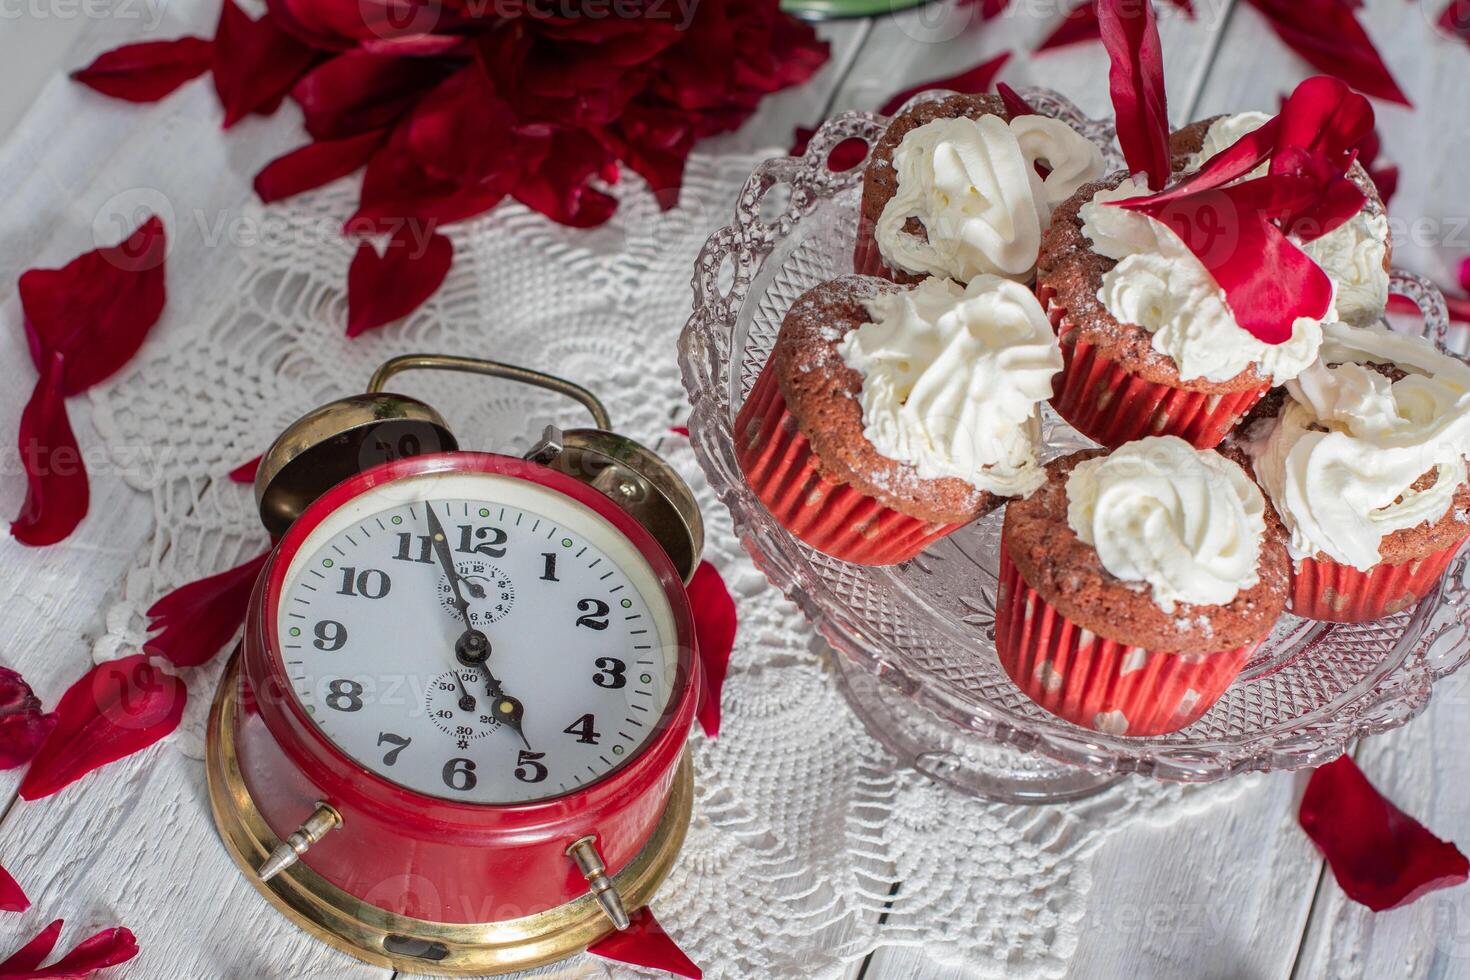 still life in English style with scarlet peonies and red velvet cupcakes with on a platter,tea time on red antique clock photo